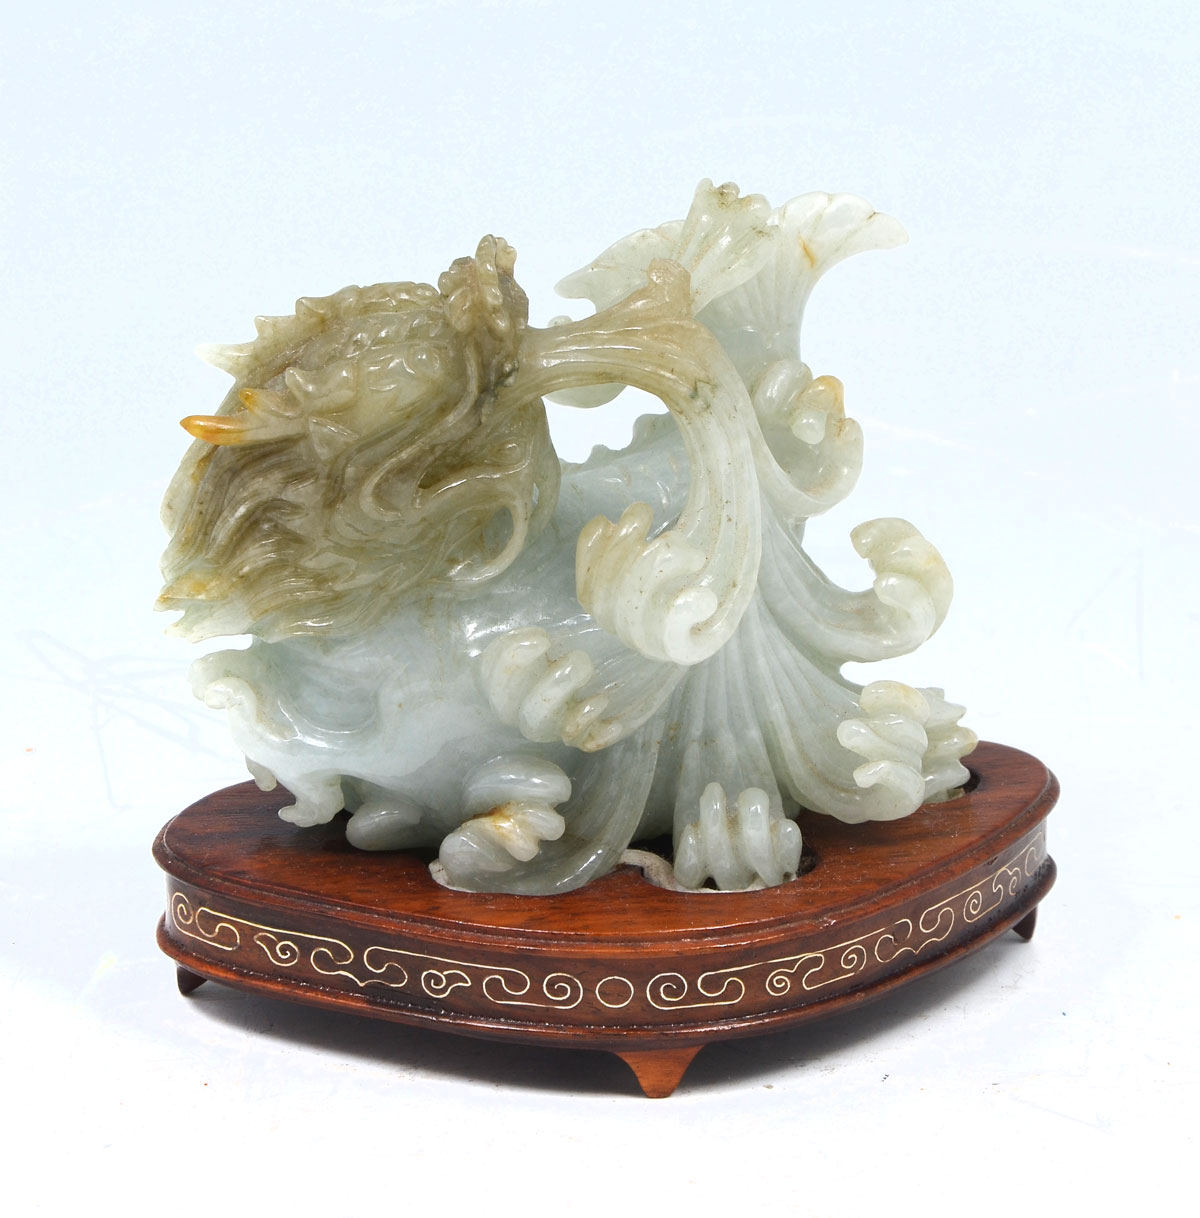 CARVED CHINESE JADE DRAGON FISH SCULPTURE: